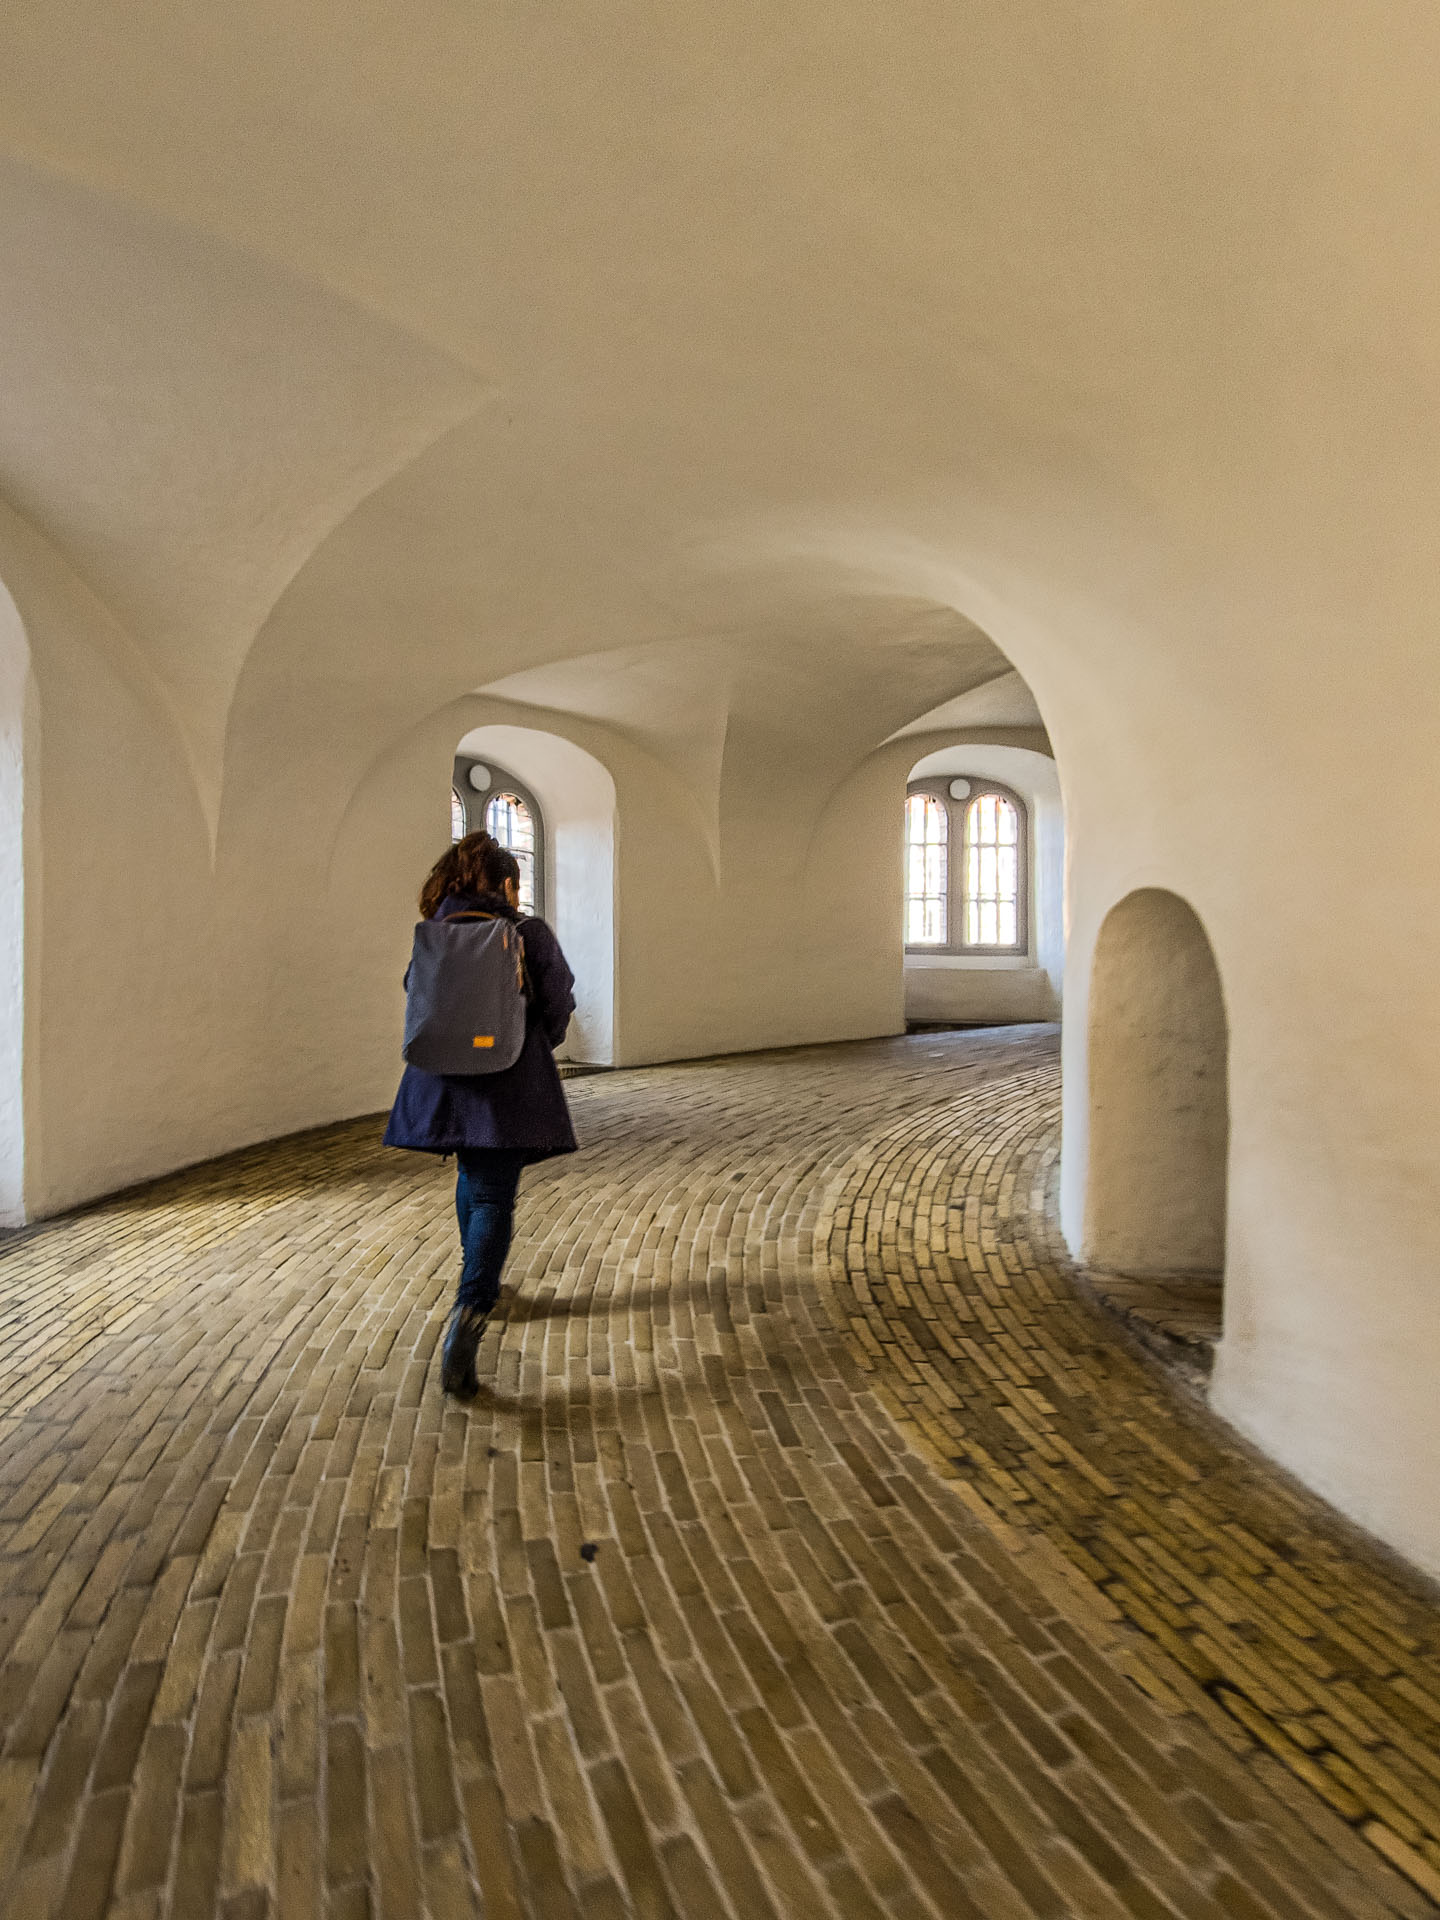 Walking up the slope the Round Tower Copenhagen